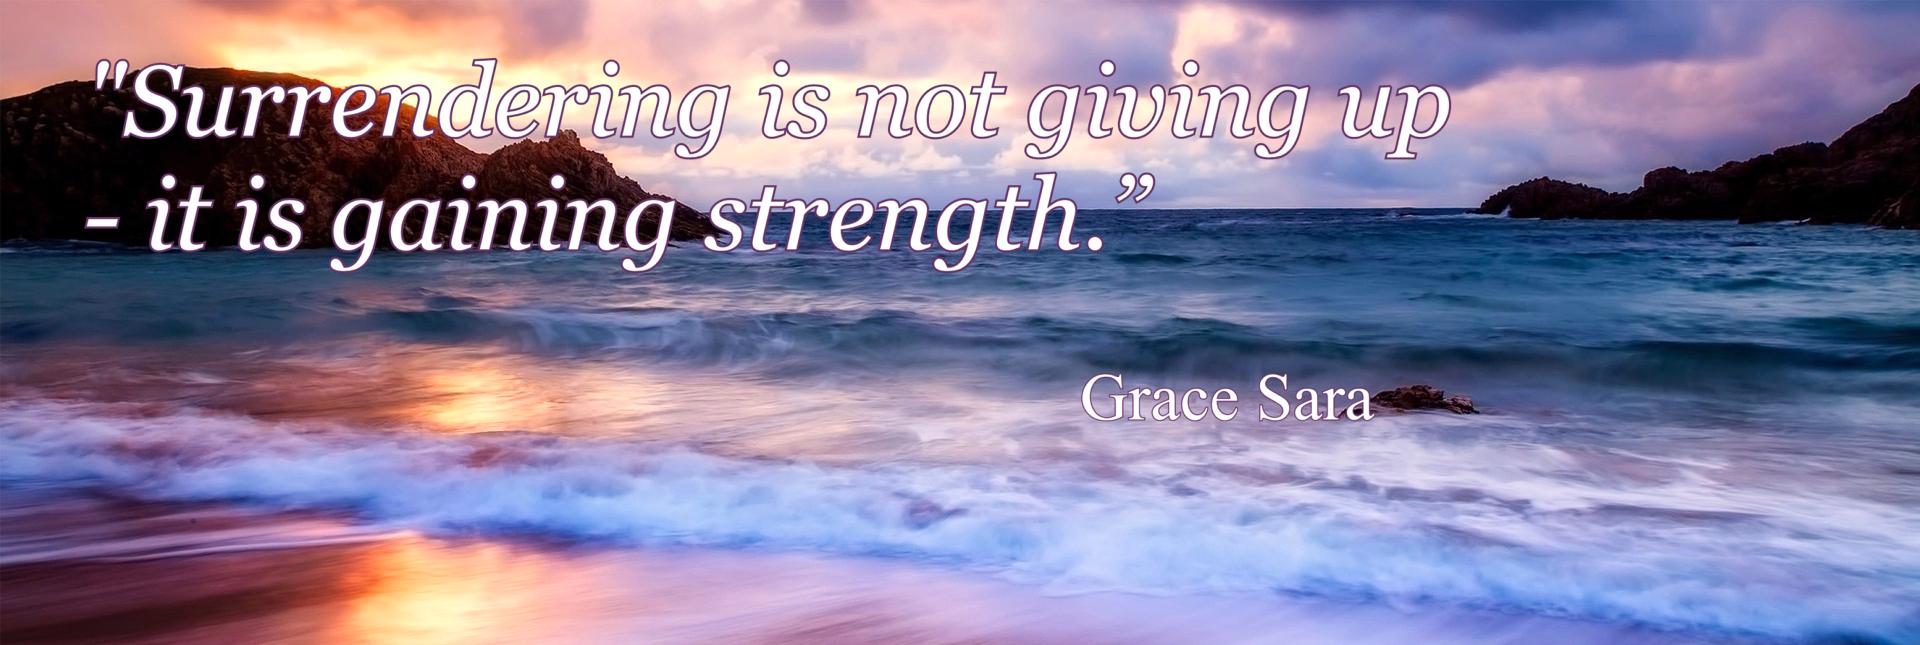 "Surrendering is not giving up  - it is gaining strength.” - Grace Sara.  DML Counselling & Psychotherapy, County Wexford, Ireland